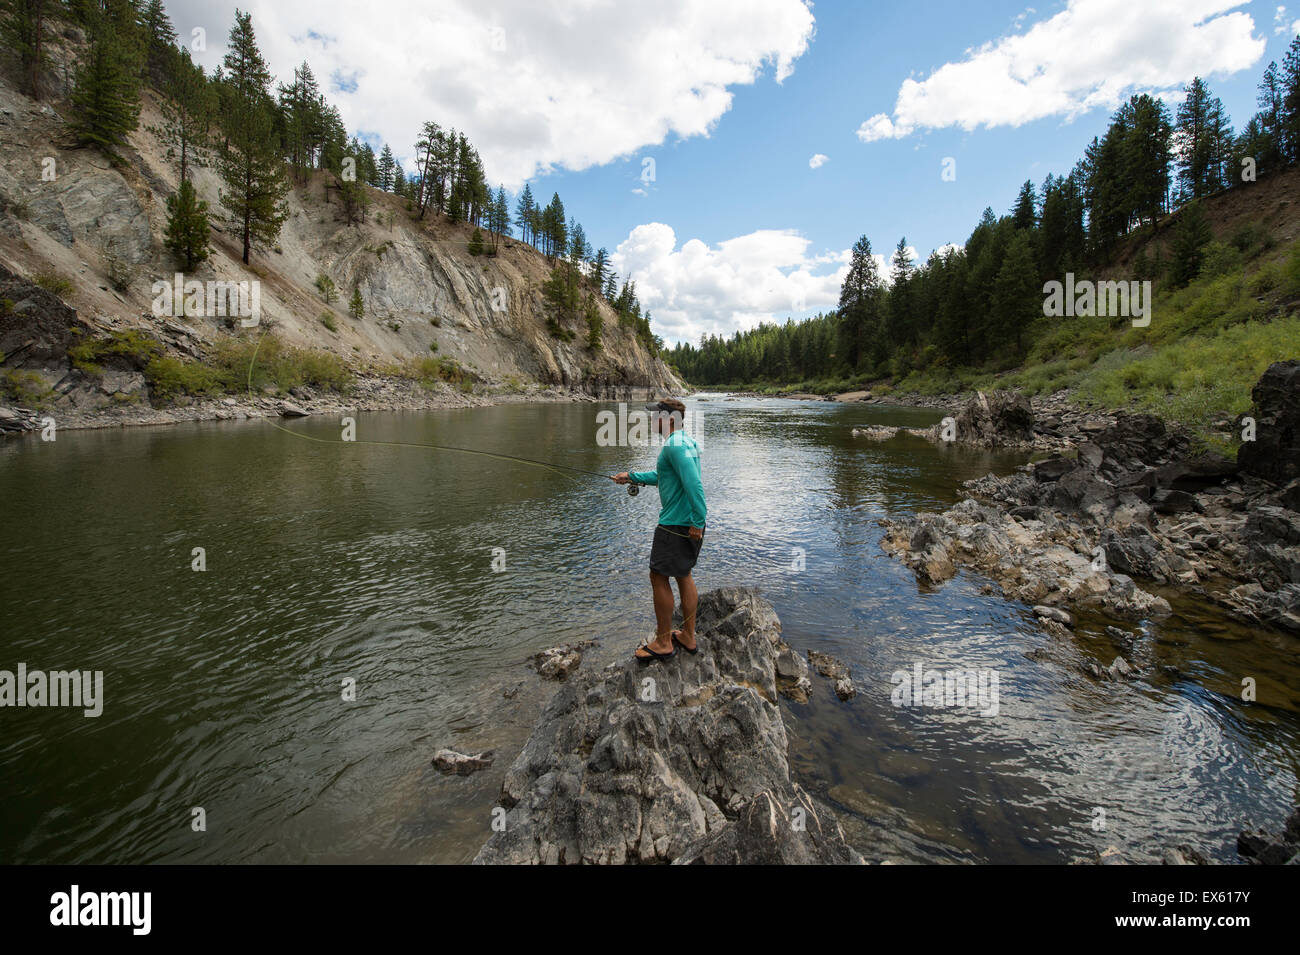 Young flyfisherman casting his rod into a Montana river Stock Photo